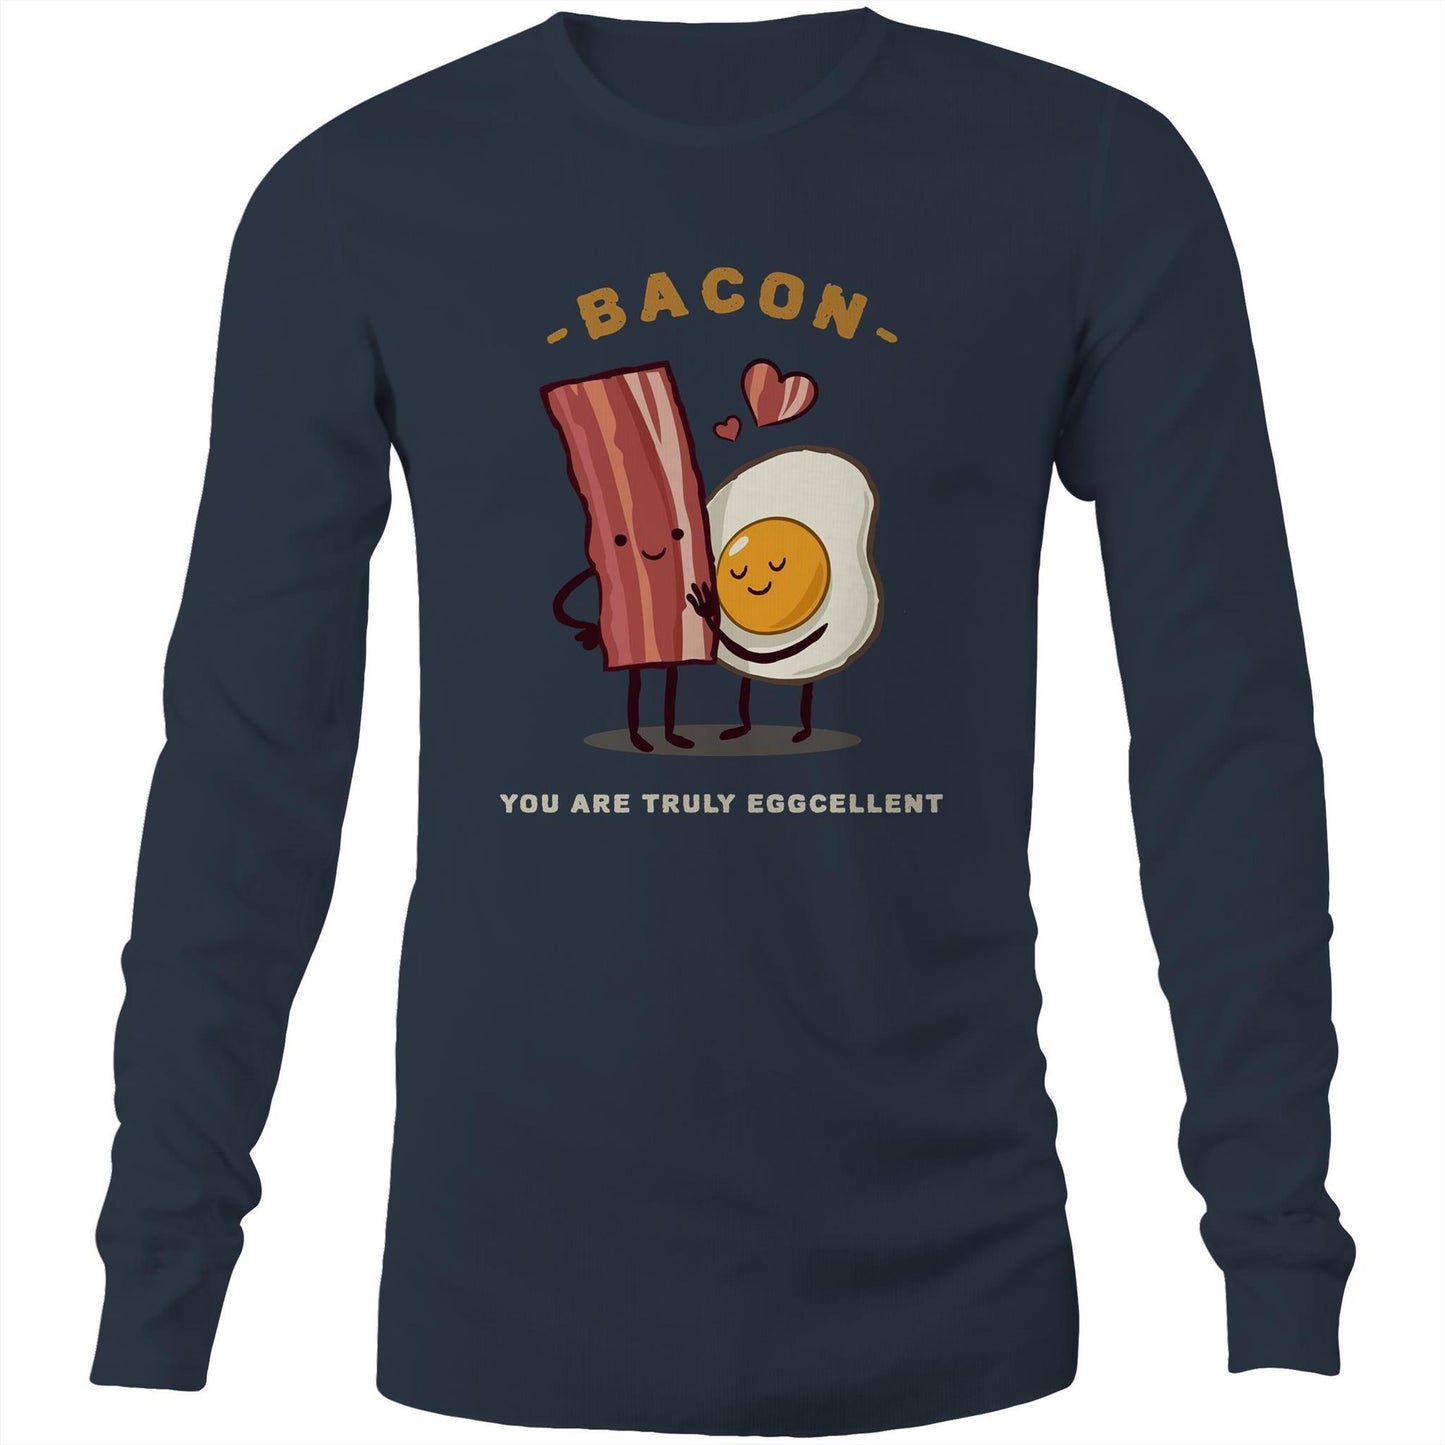 Bacon, You Are Truly Eggcellent - Long Sleeve T-Shirt Navy Unisex Long Sleeve T-shirt Food